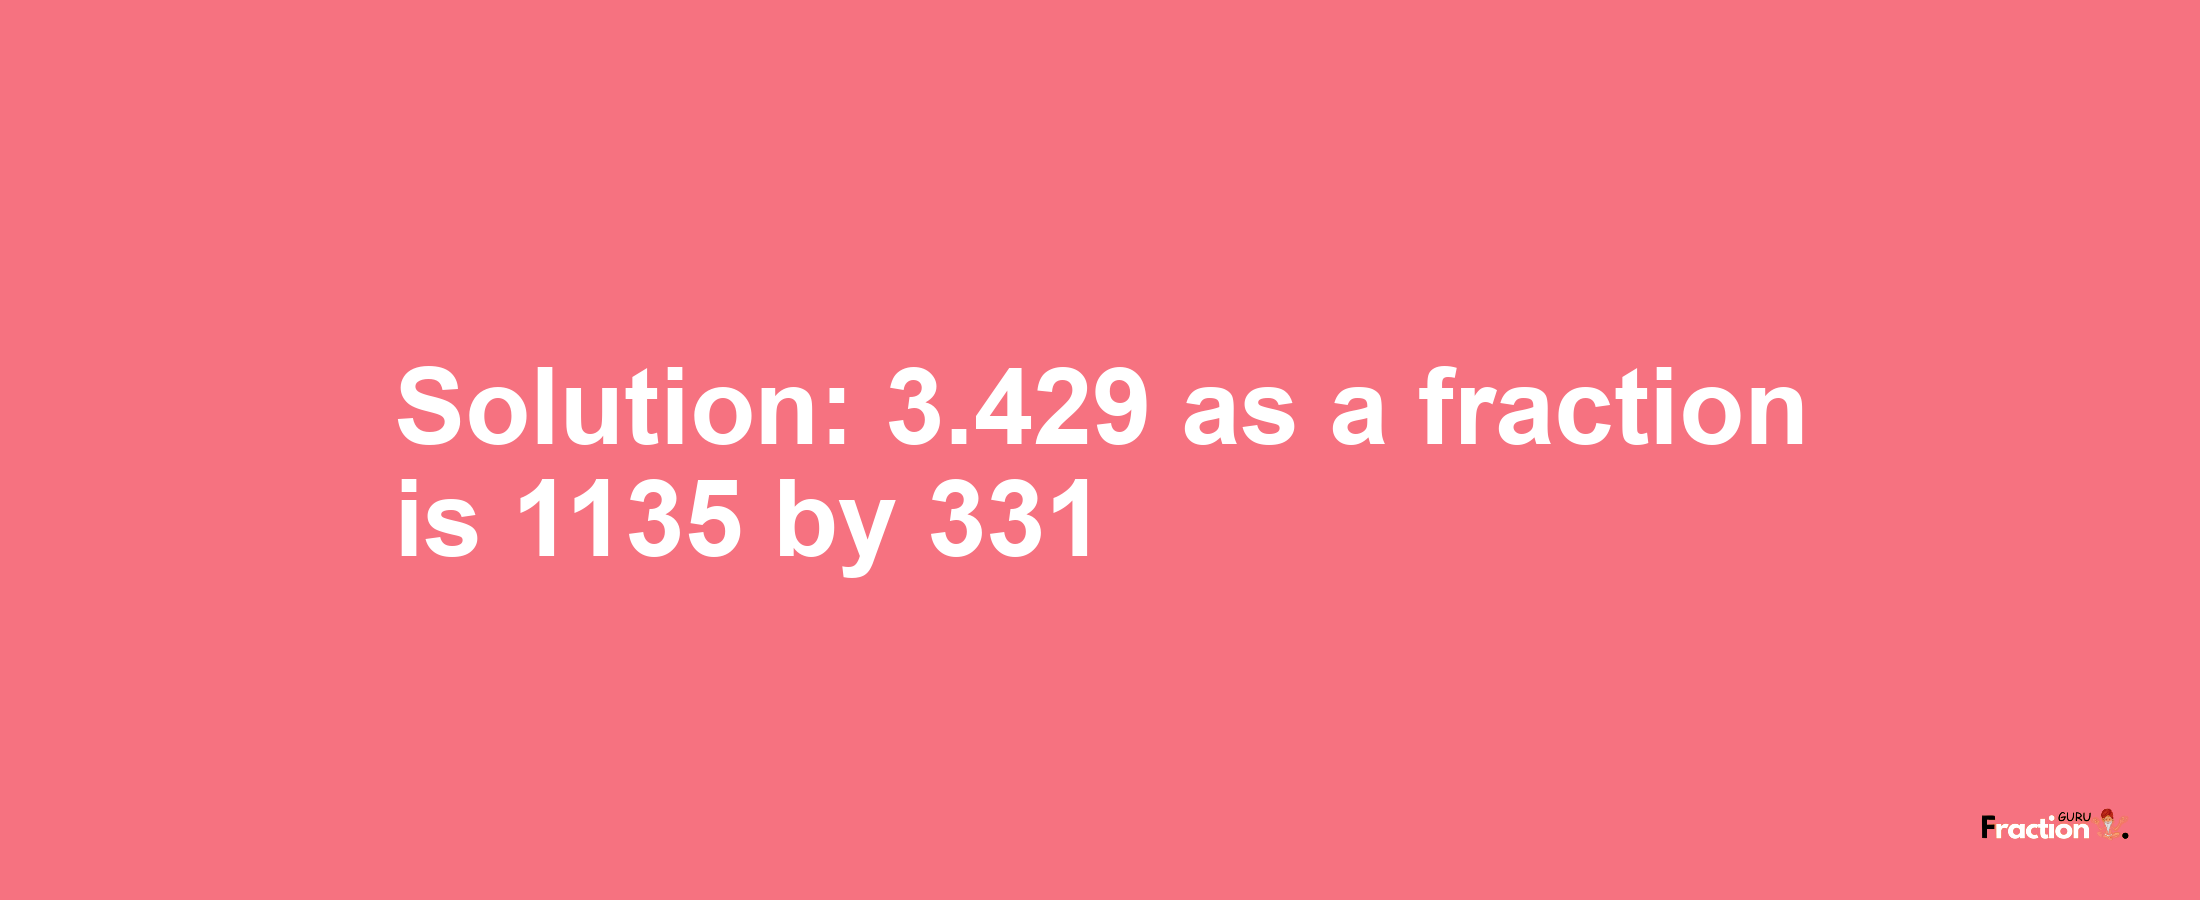 Solution:3.429 as a fraction is 1135/331